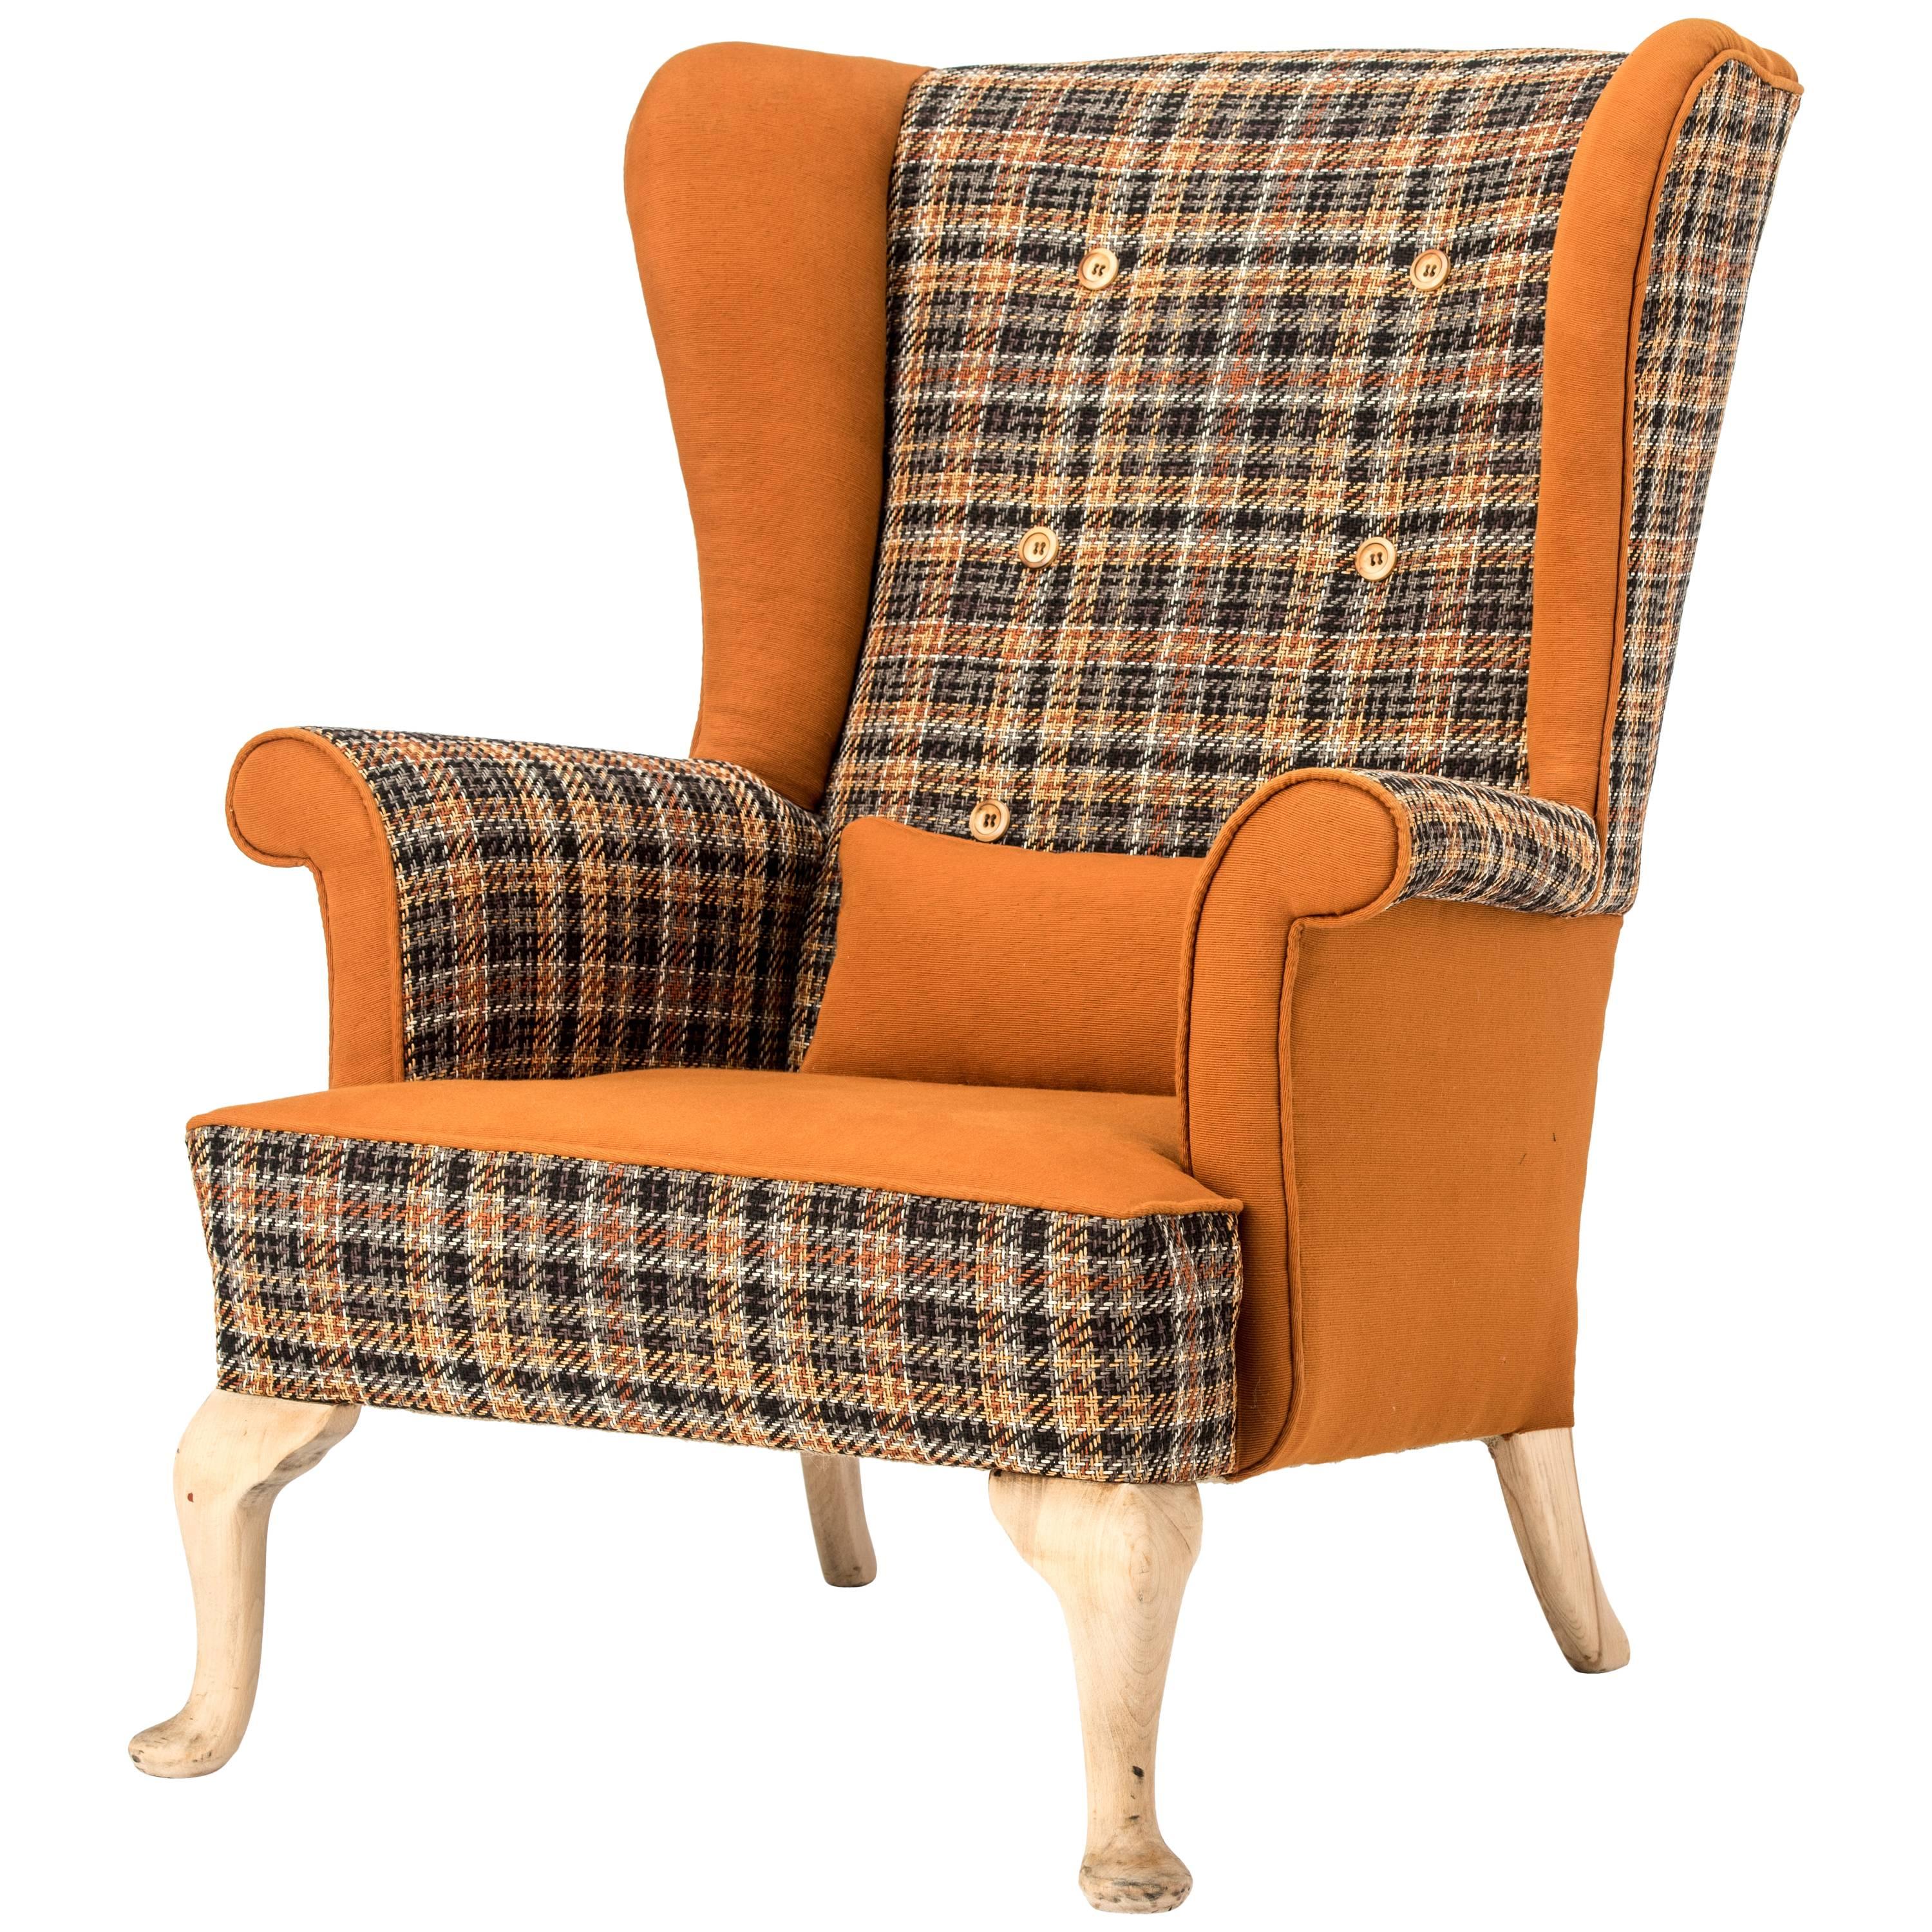 The 'Thunderbird' Parker Knoll Plaid Back Vintage Fireside Wing Chair For Sale